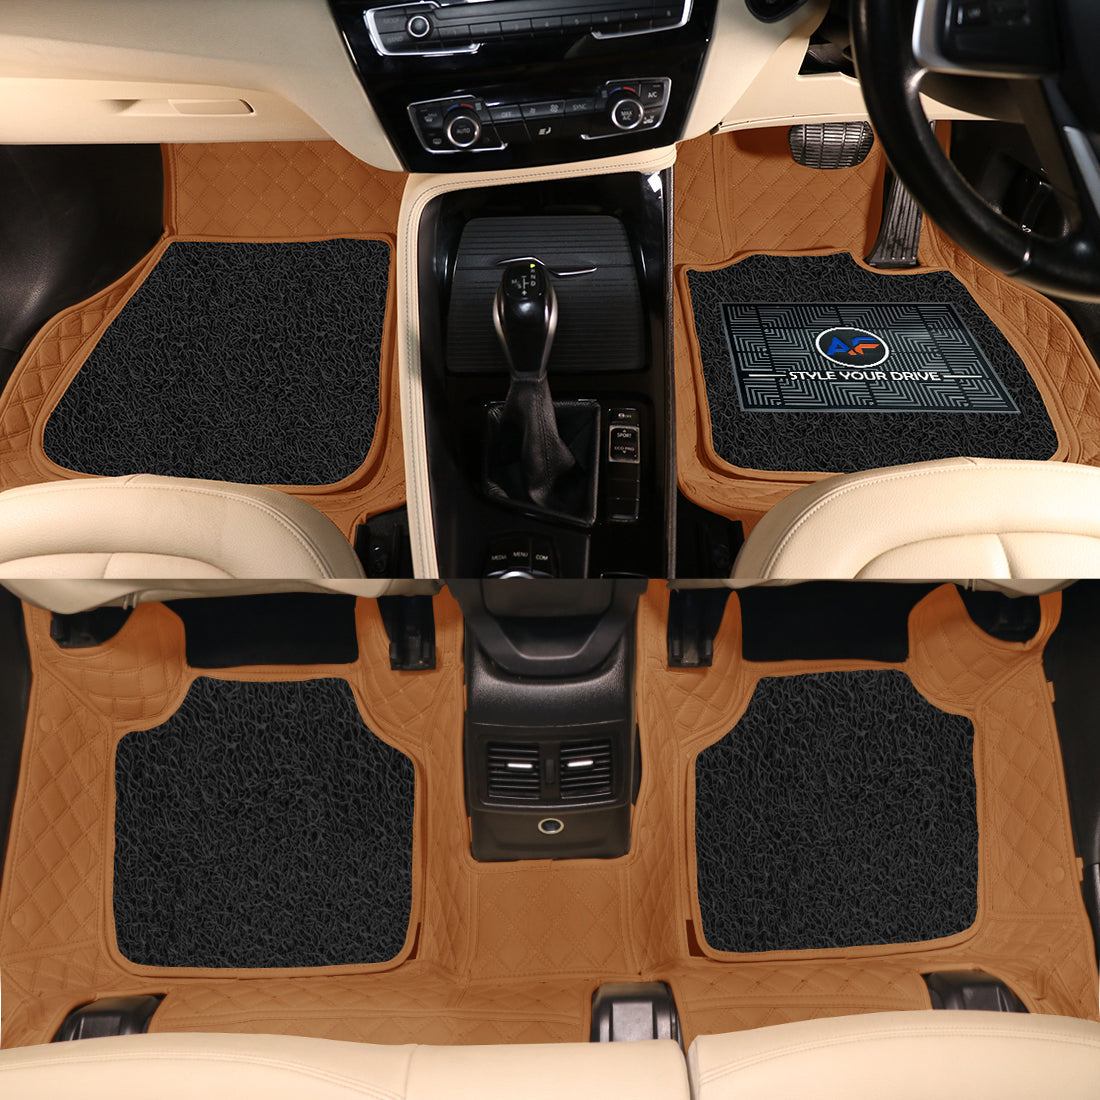 Ford Endeavour 2011-16-7D Luxury Car Mat, All Weather Proof, Anti-Skid, 100% Waterproof & Odorless with Unique Diamond Fish Design (24mm Luxury PU Leather, 2 Rows)